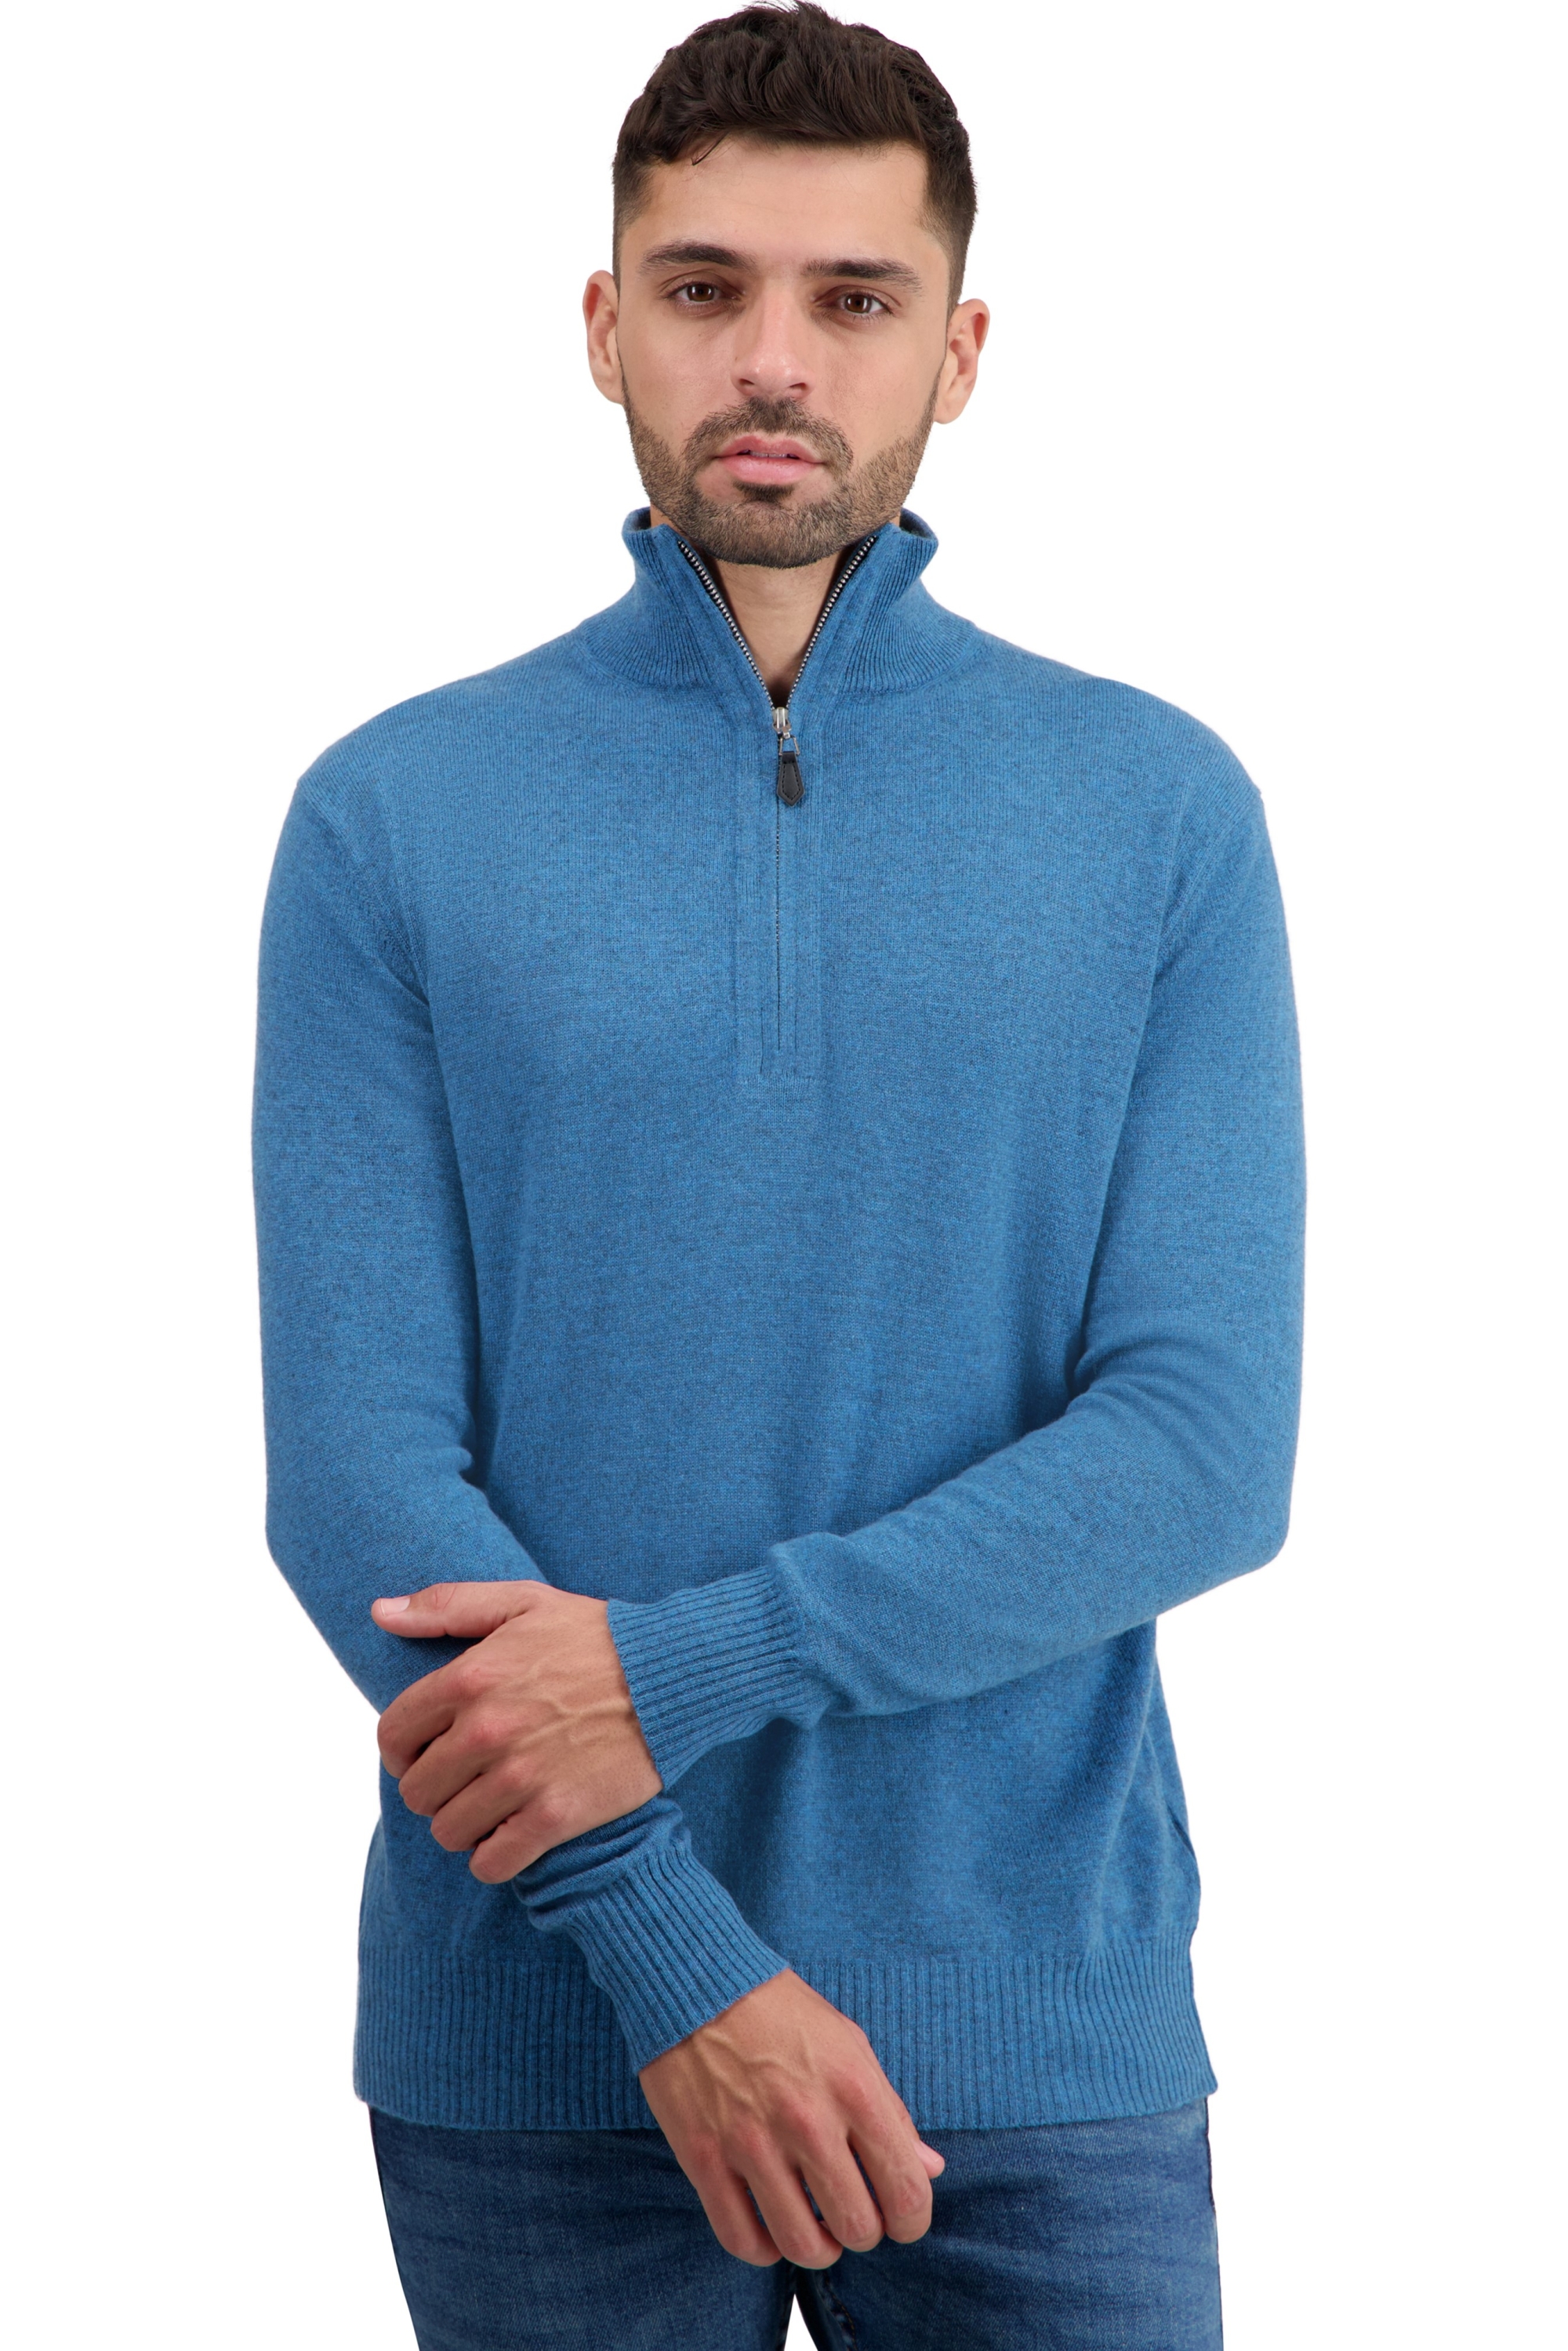 Cachemire pull homme toulon first manor blue 2xl